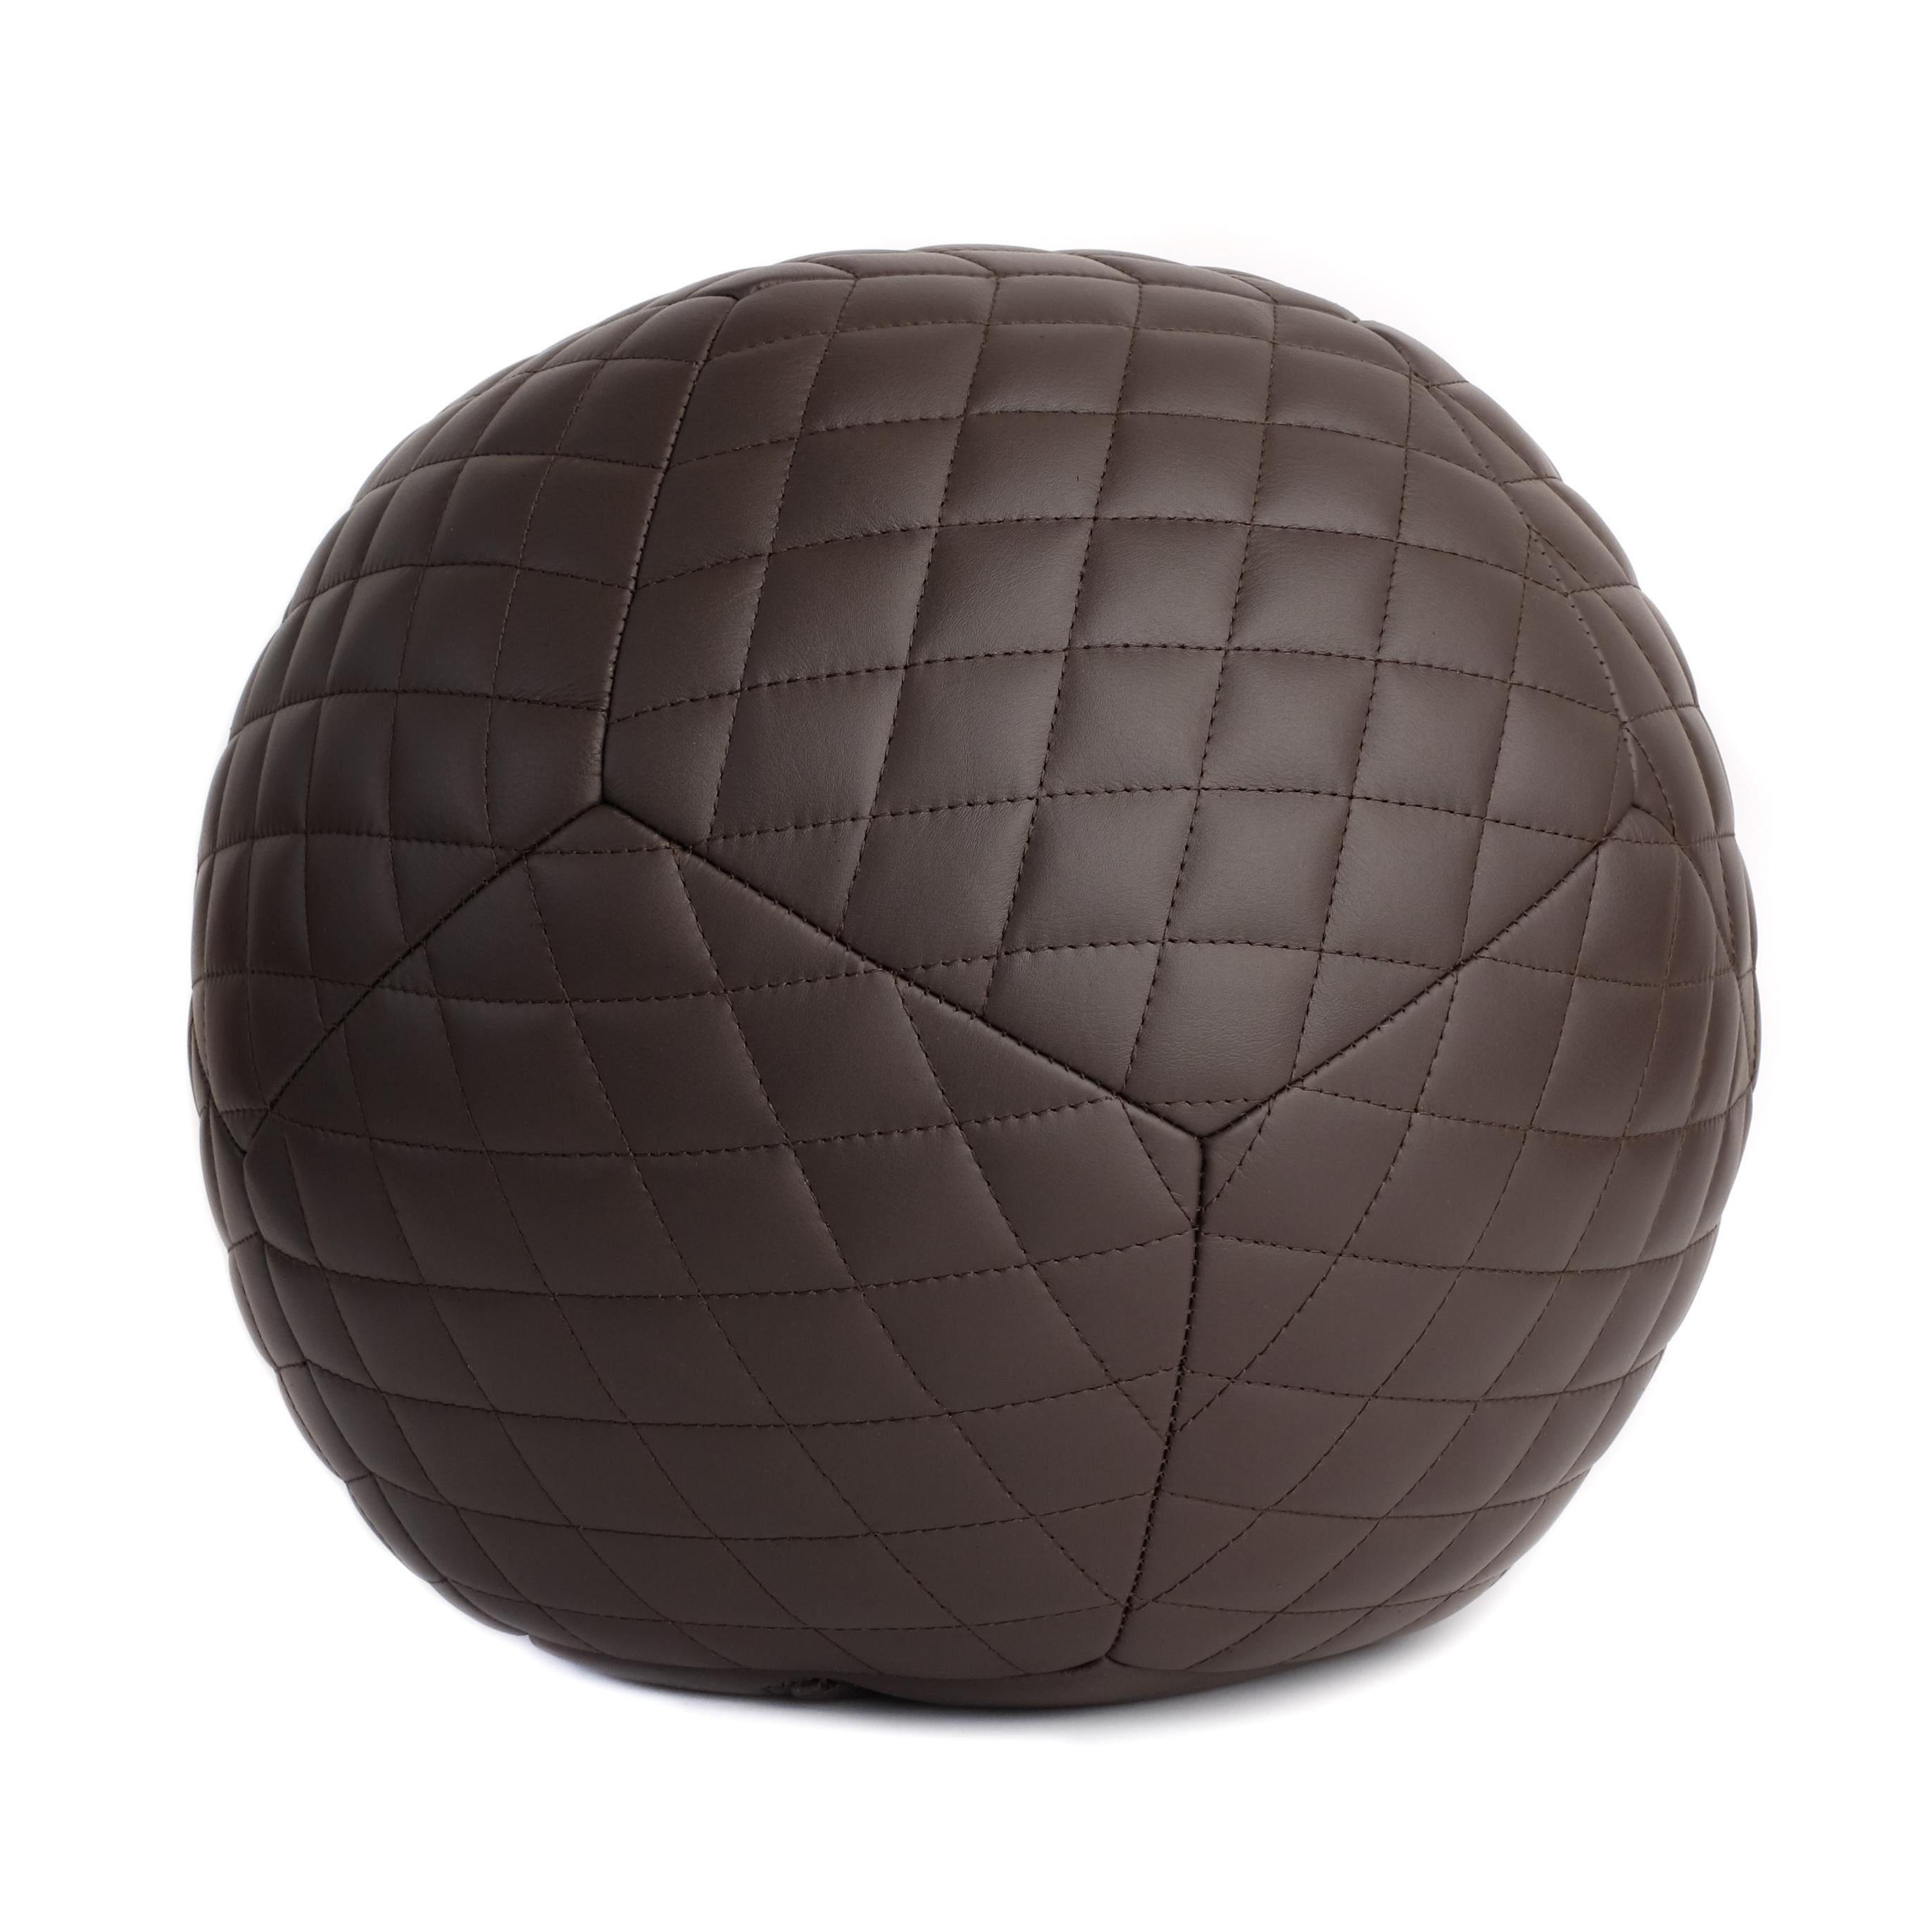 Featured with diamond banded detailing, the Diamond Ottoman is inspired by fundamental geometry. These structured and supportive round ball ottomans are designed to function as a traditional leg rest, add a twist to secondary living room seating, or